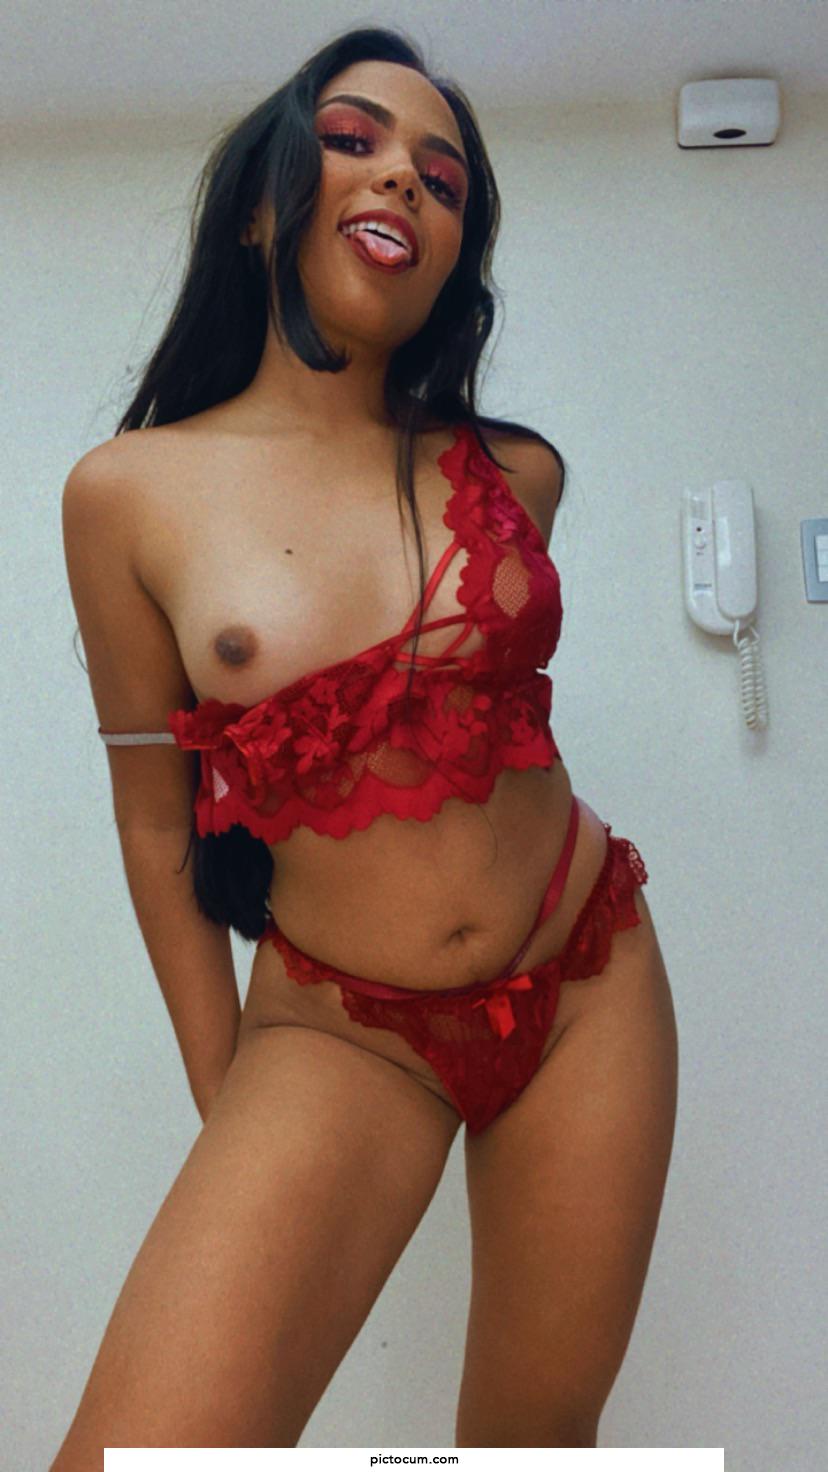 Red lingerie looks great on me